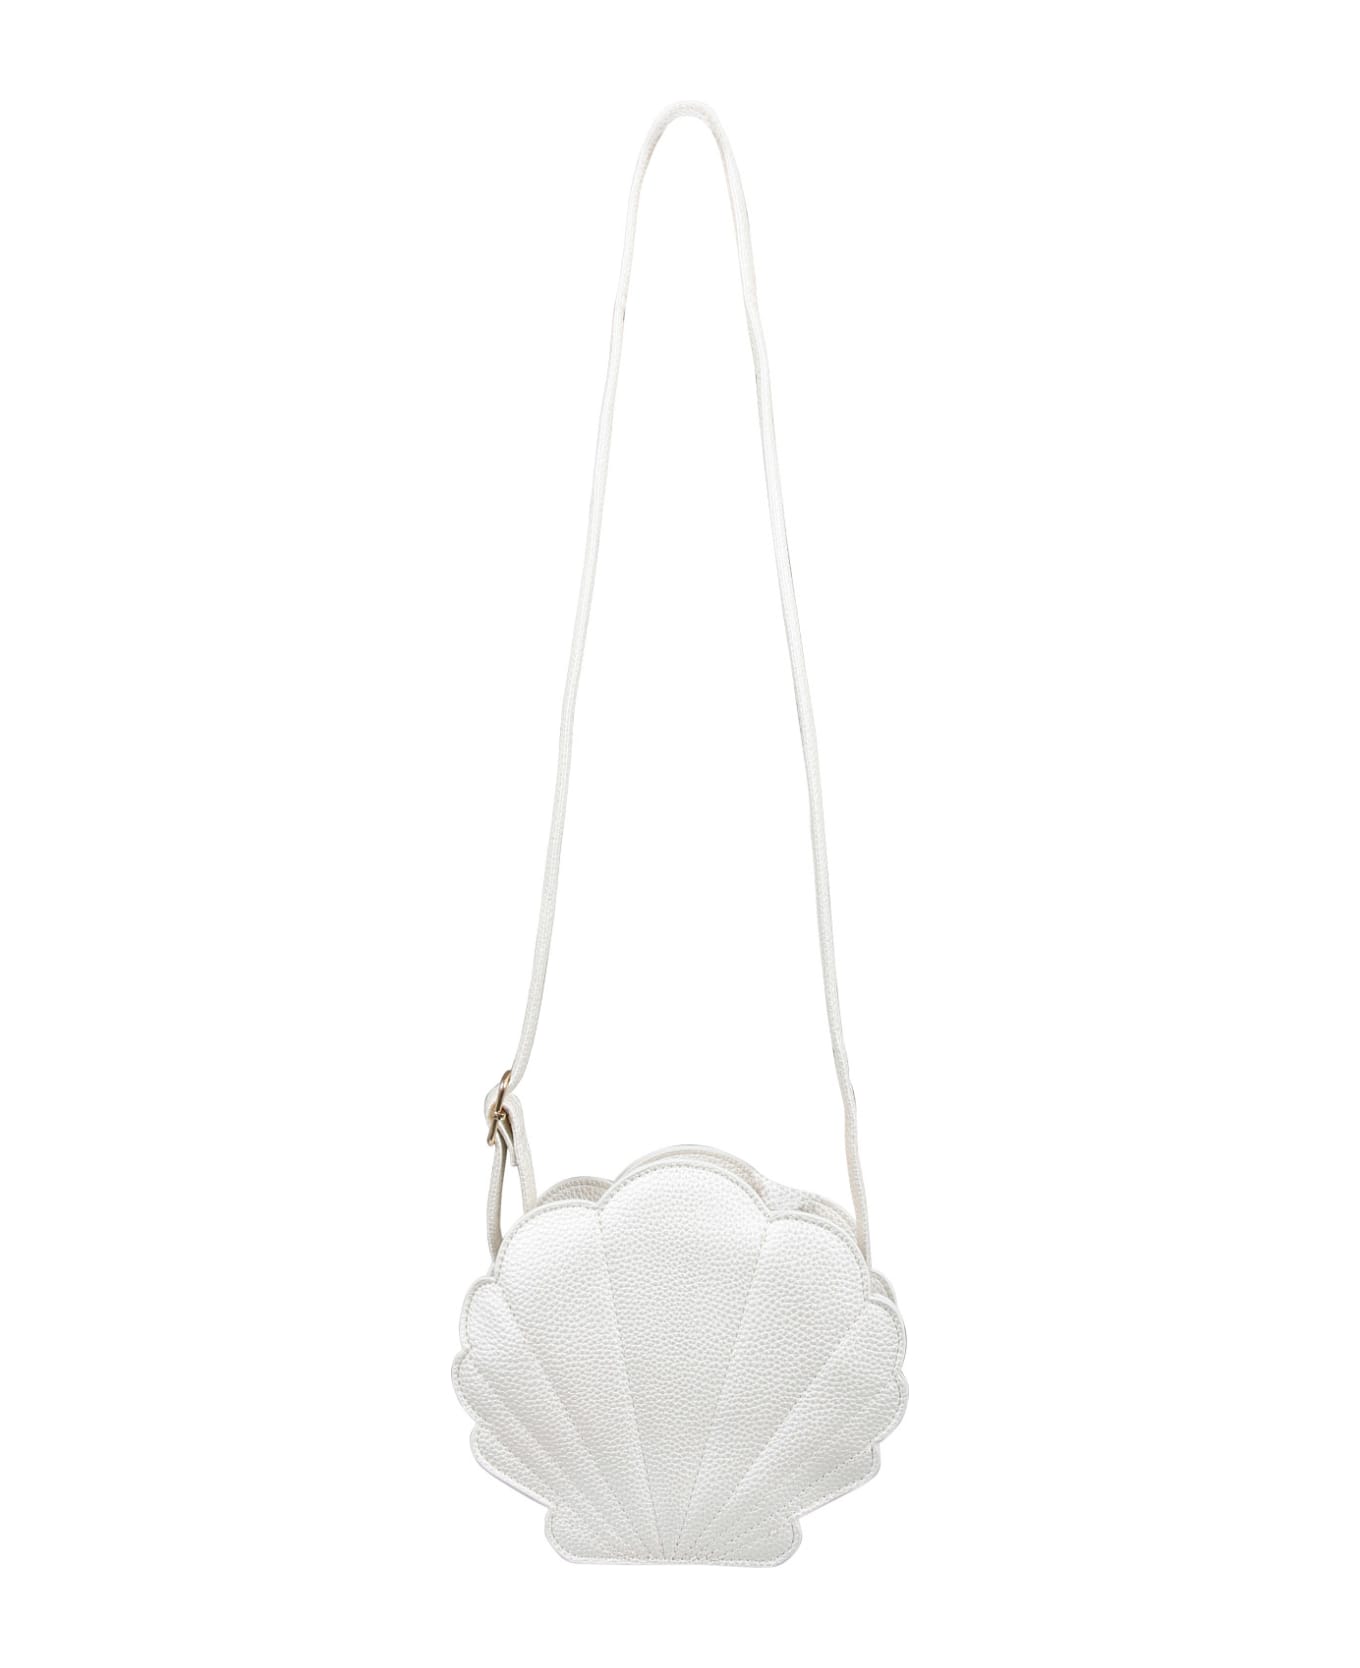 Molo White Bag For Girl - White アクセサリー＆ギフト